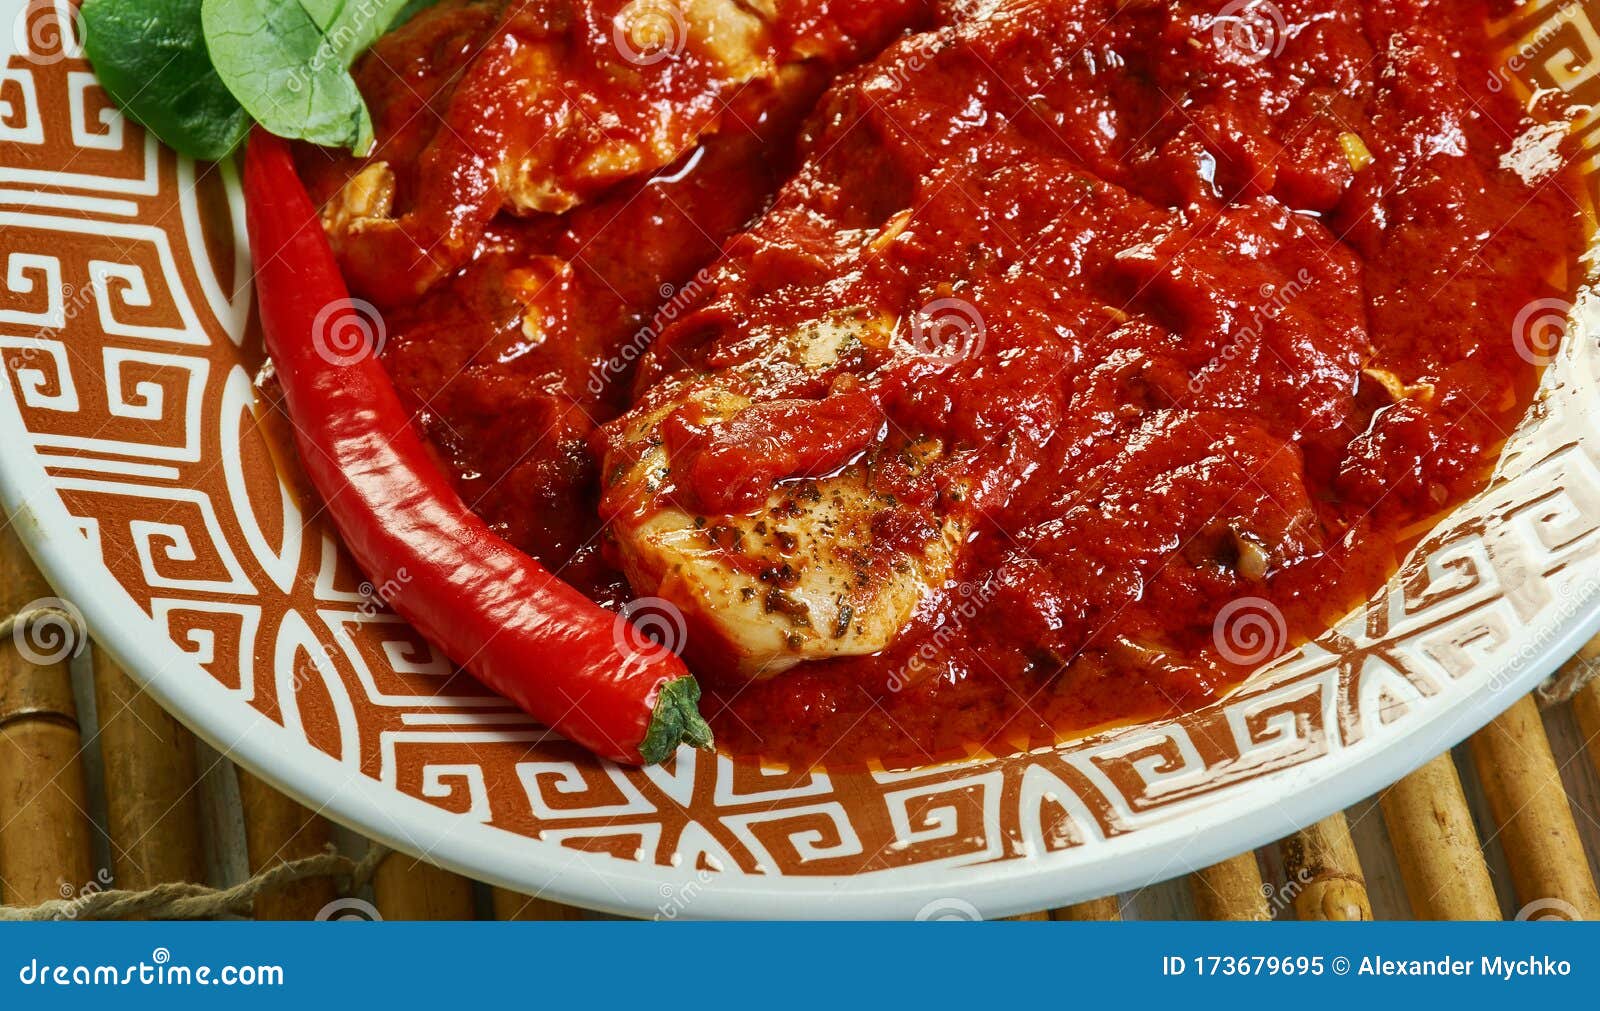 grill-roasted chicken and tomatoÃ¢â¬âred chile salsa